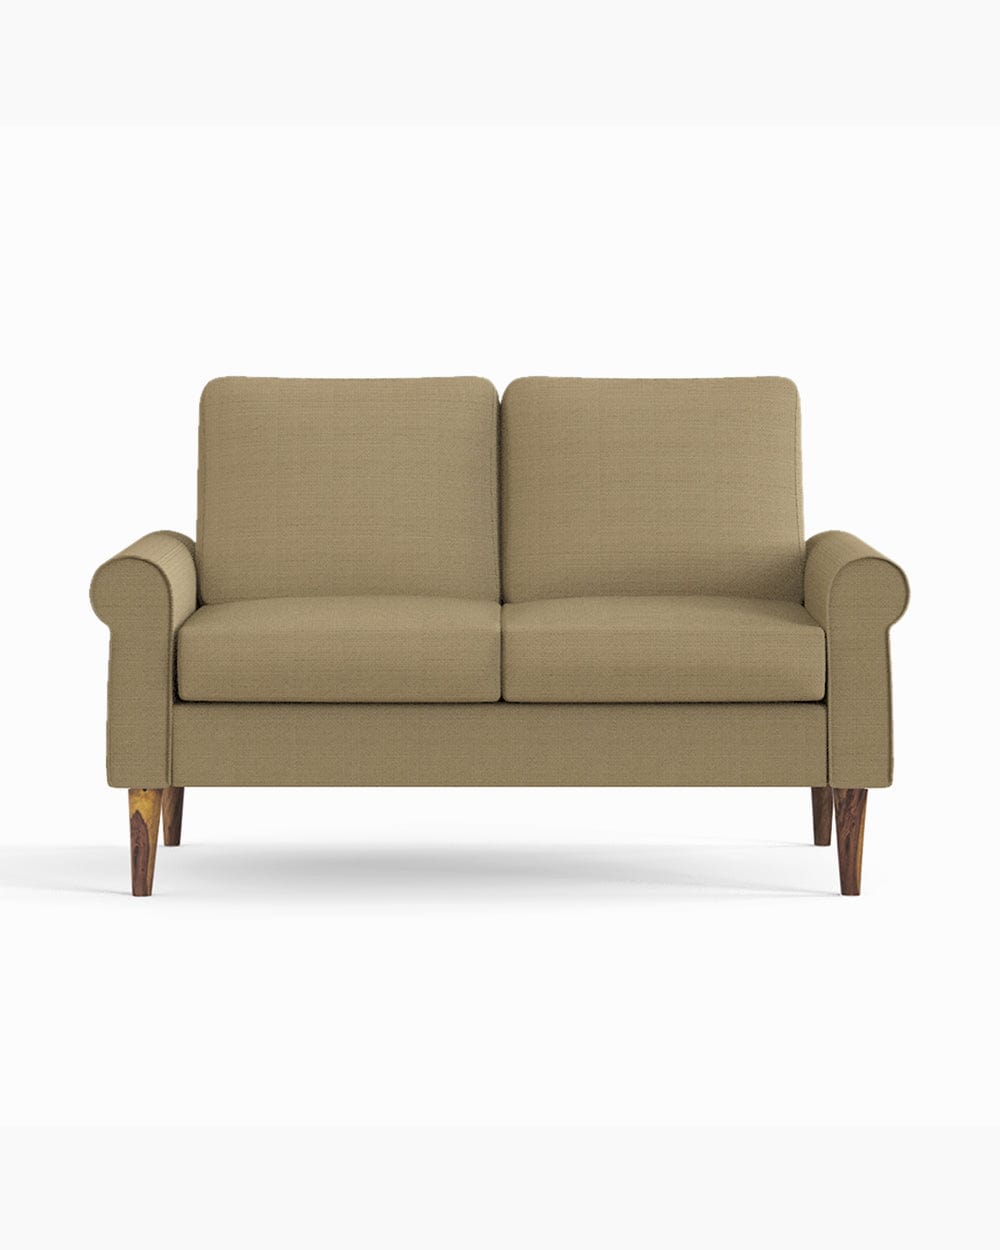 Chumbak Colonial Couch 2 Seater Beach Beige